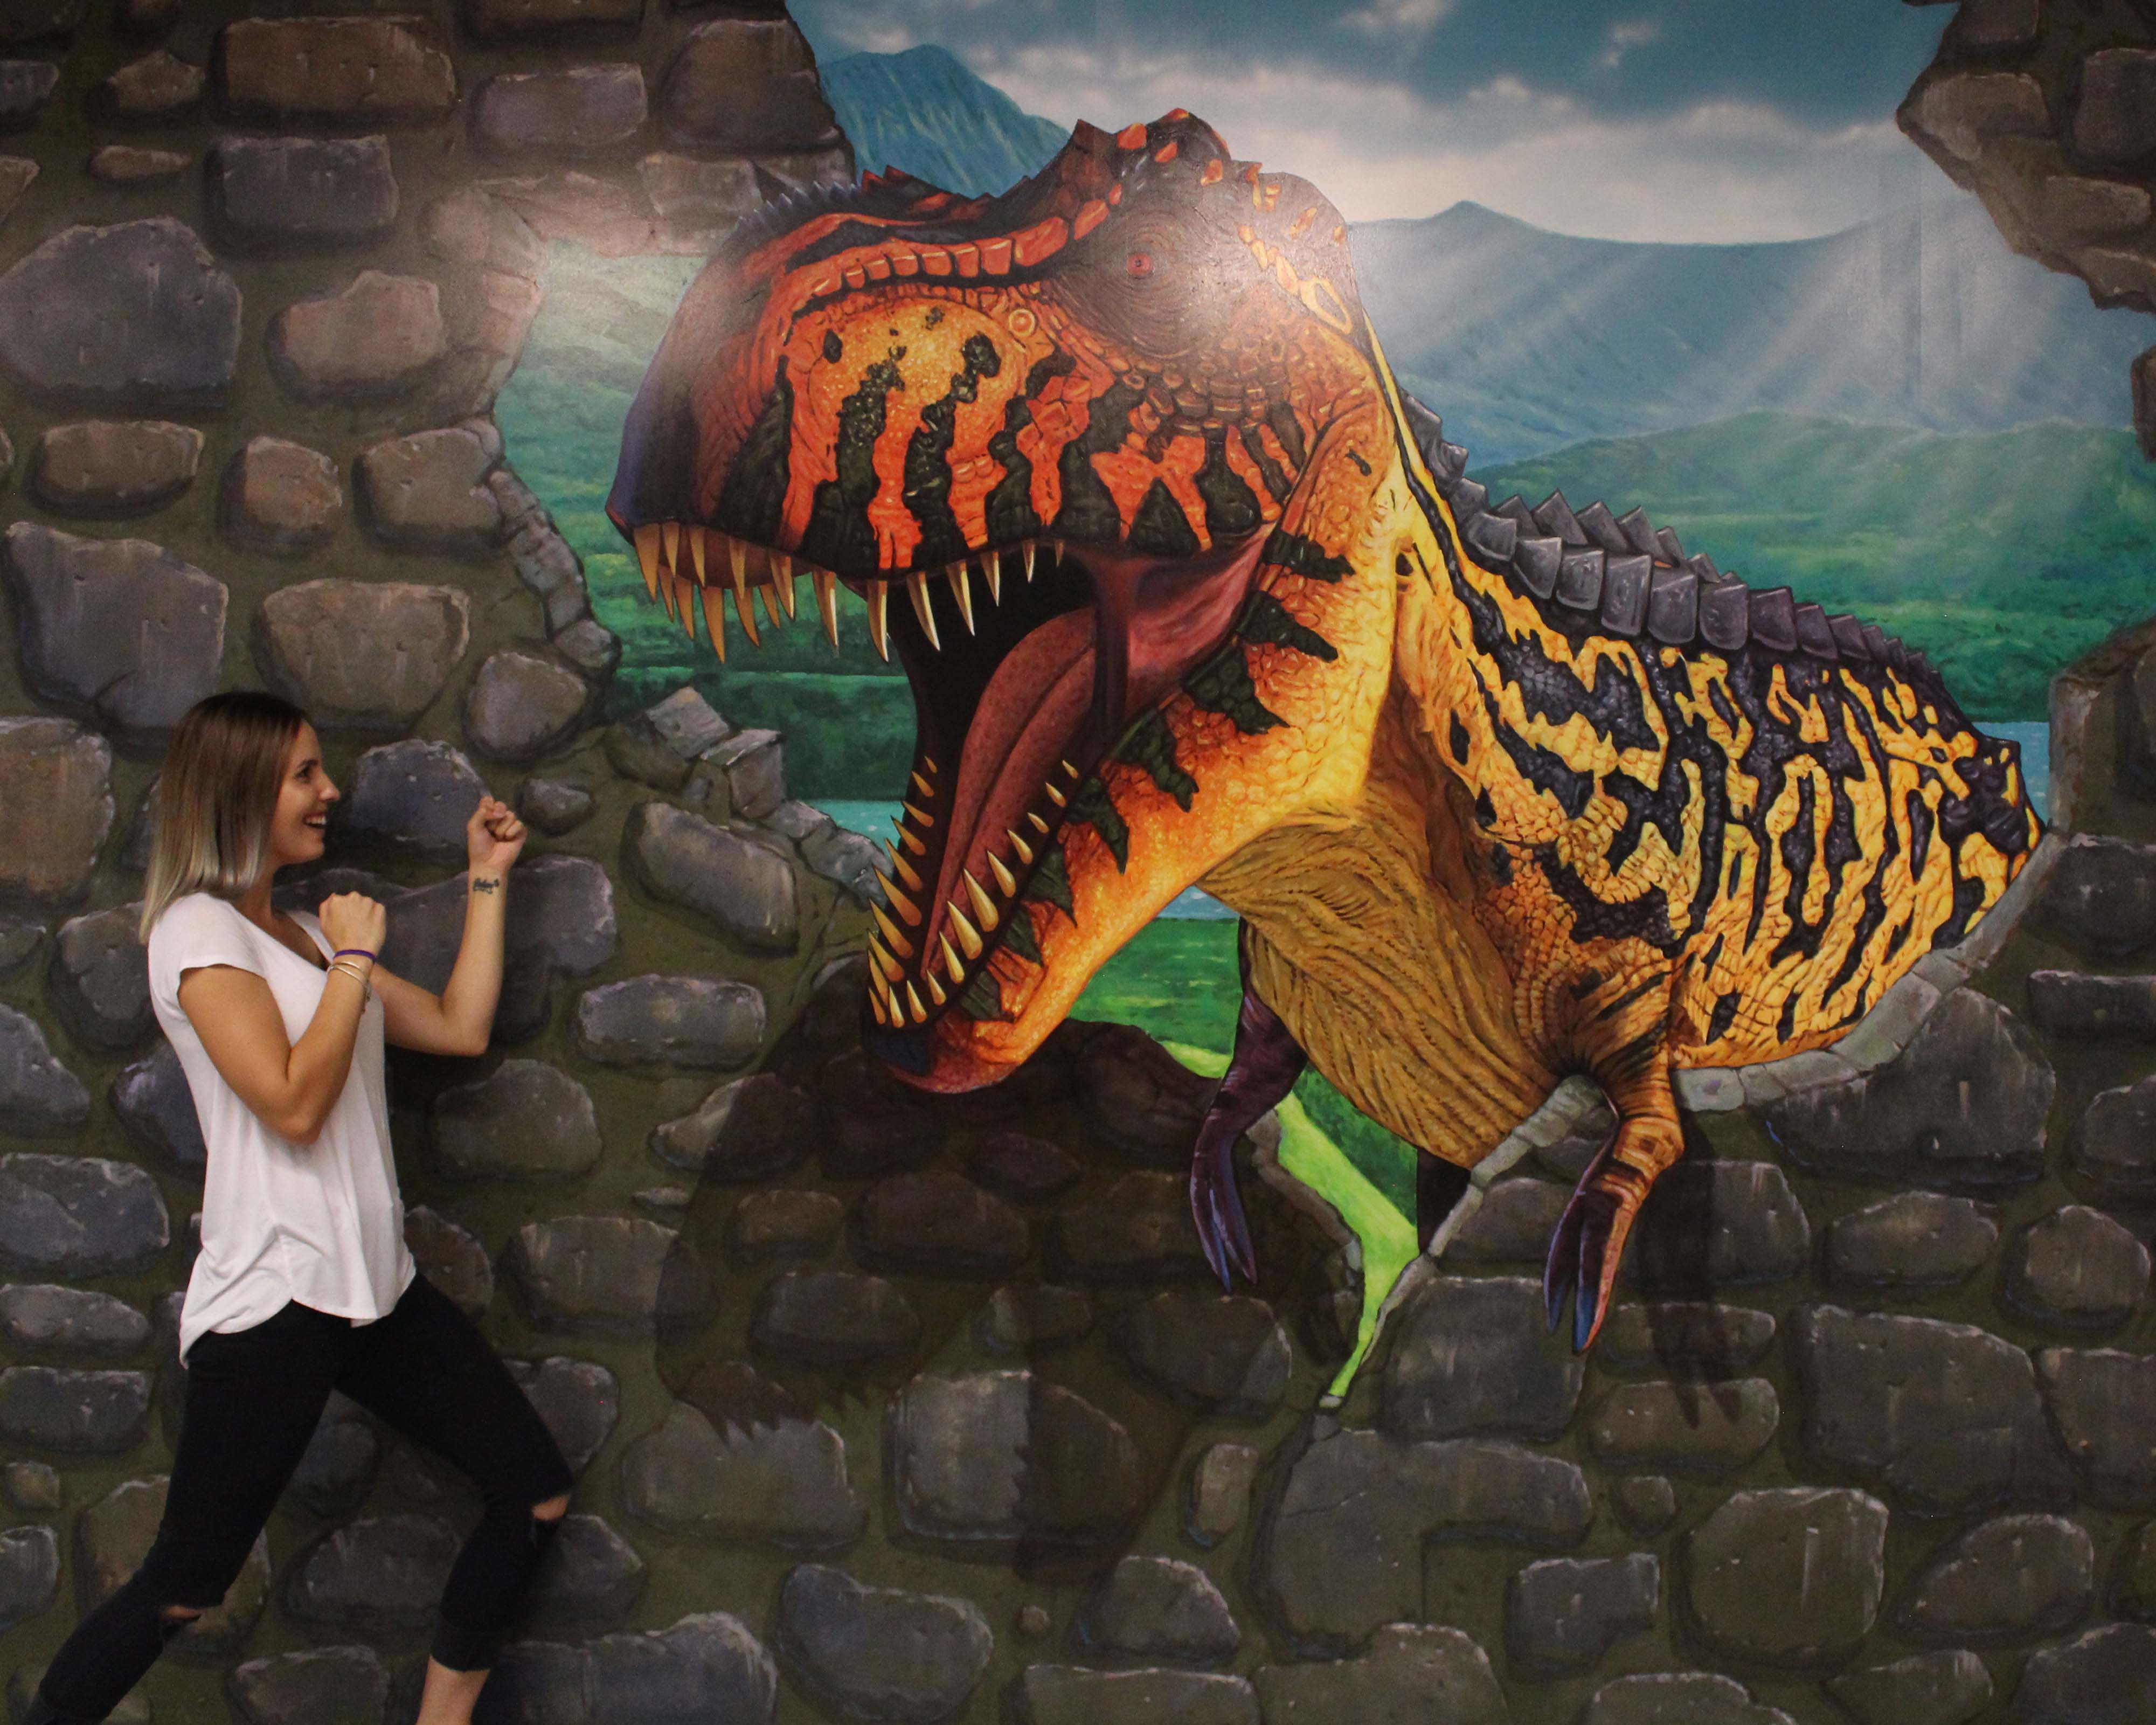 Looking for educational activities in Rotorua? How about the 3D Trick Art Gallery